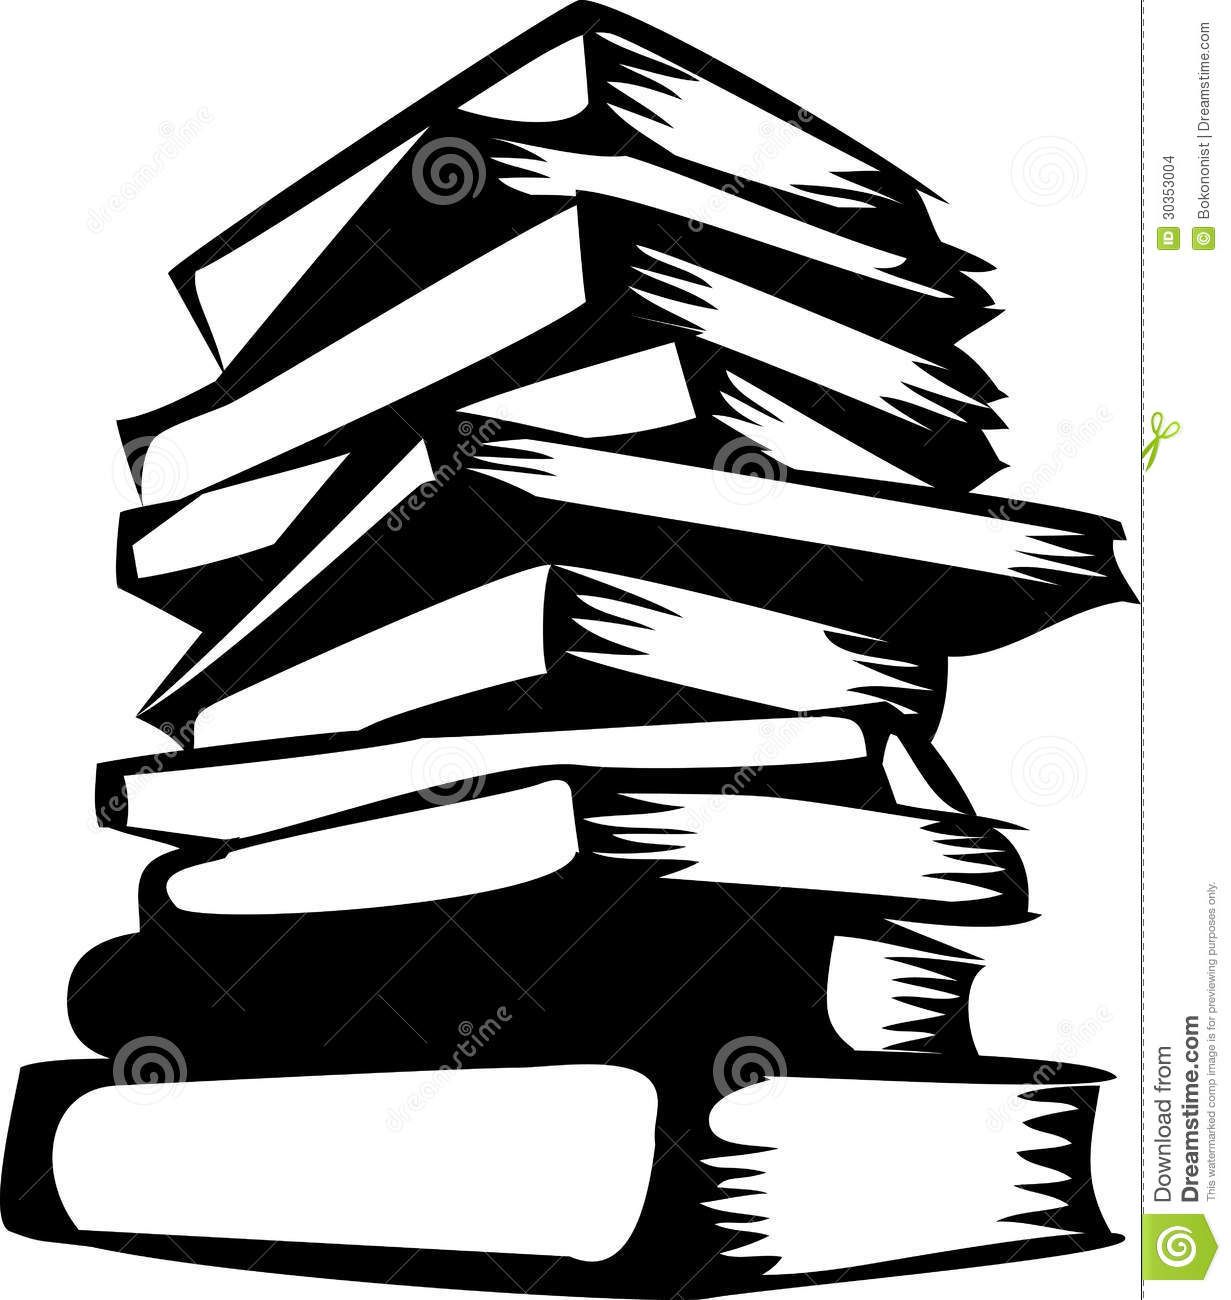 Stacked books silhouette.